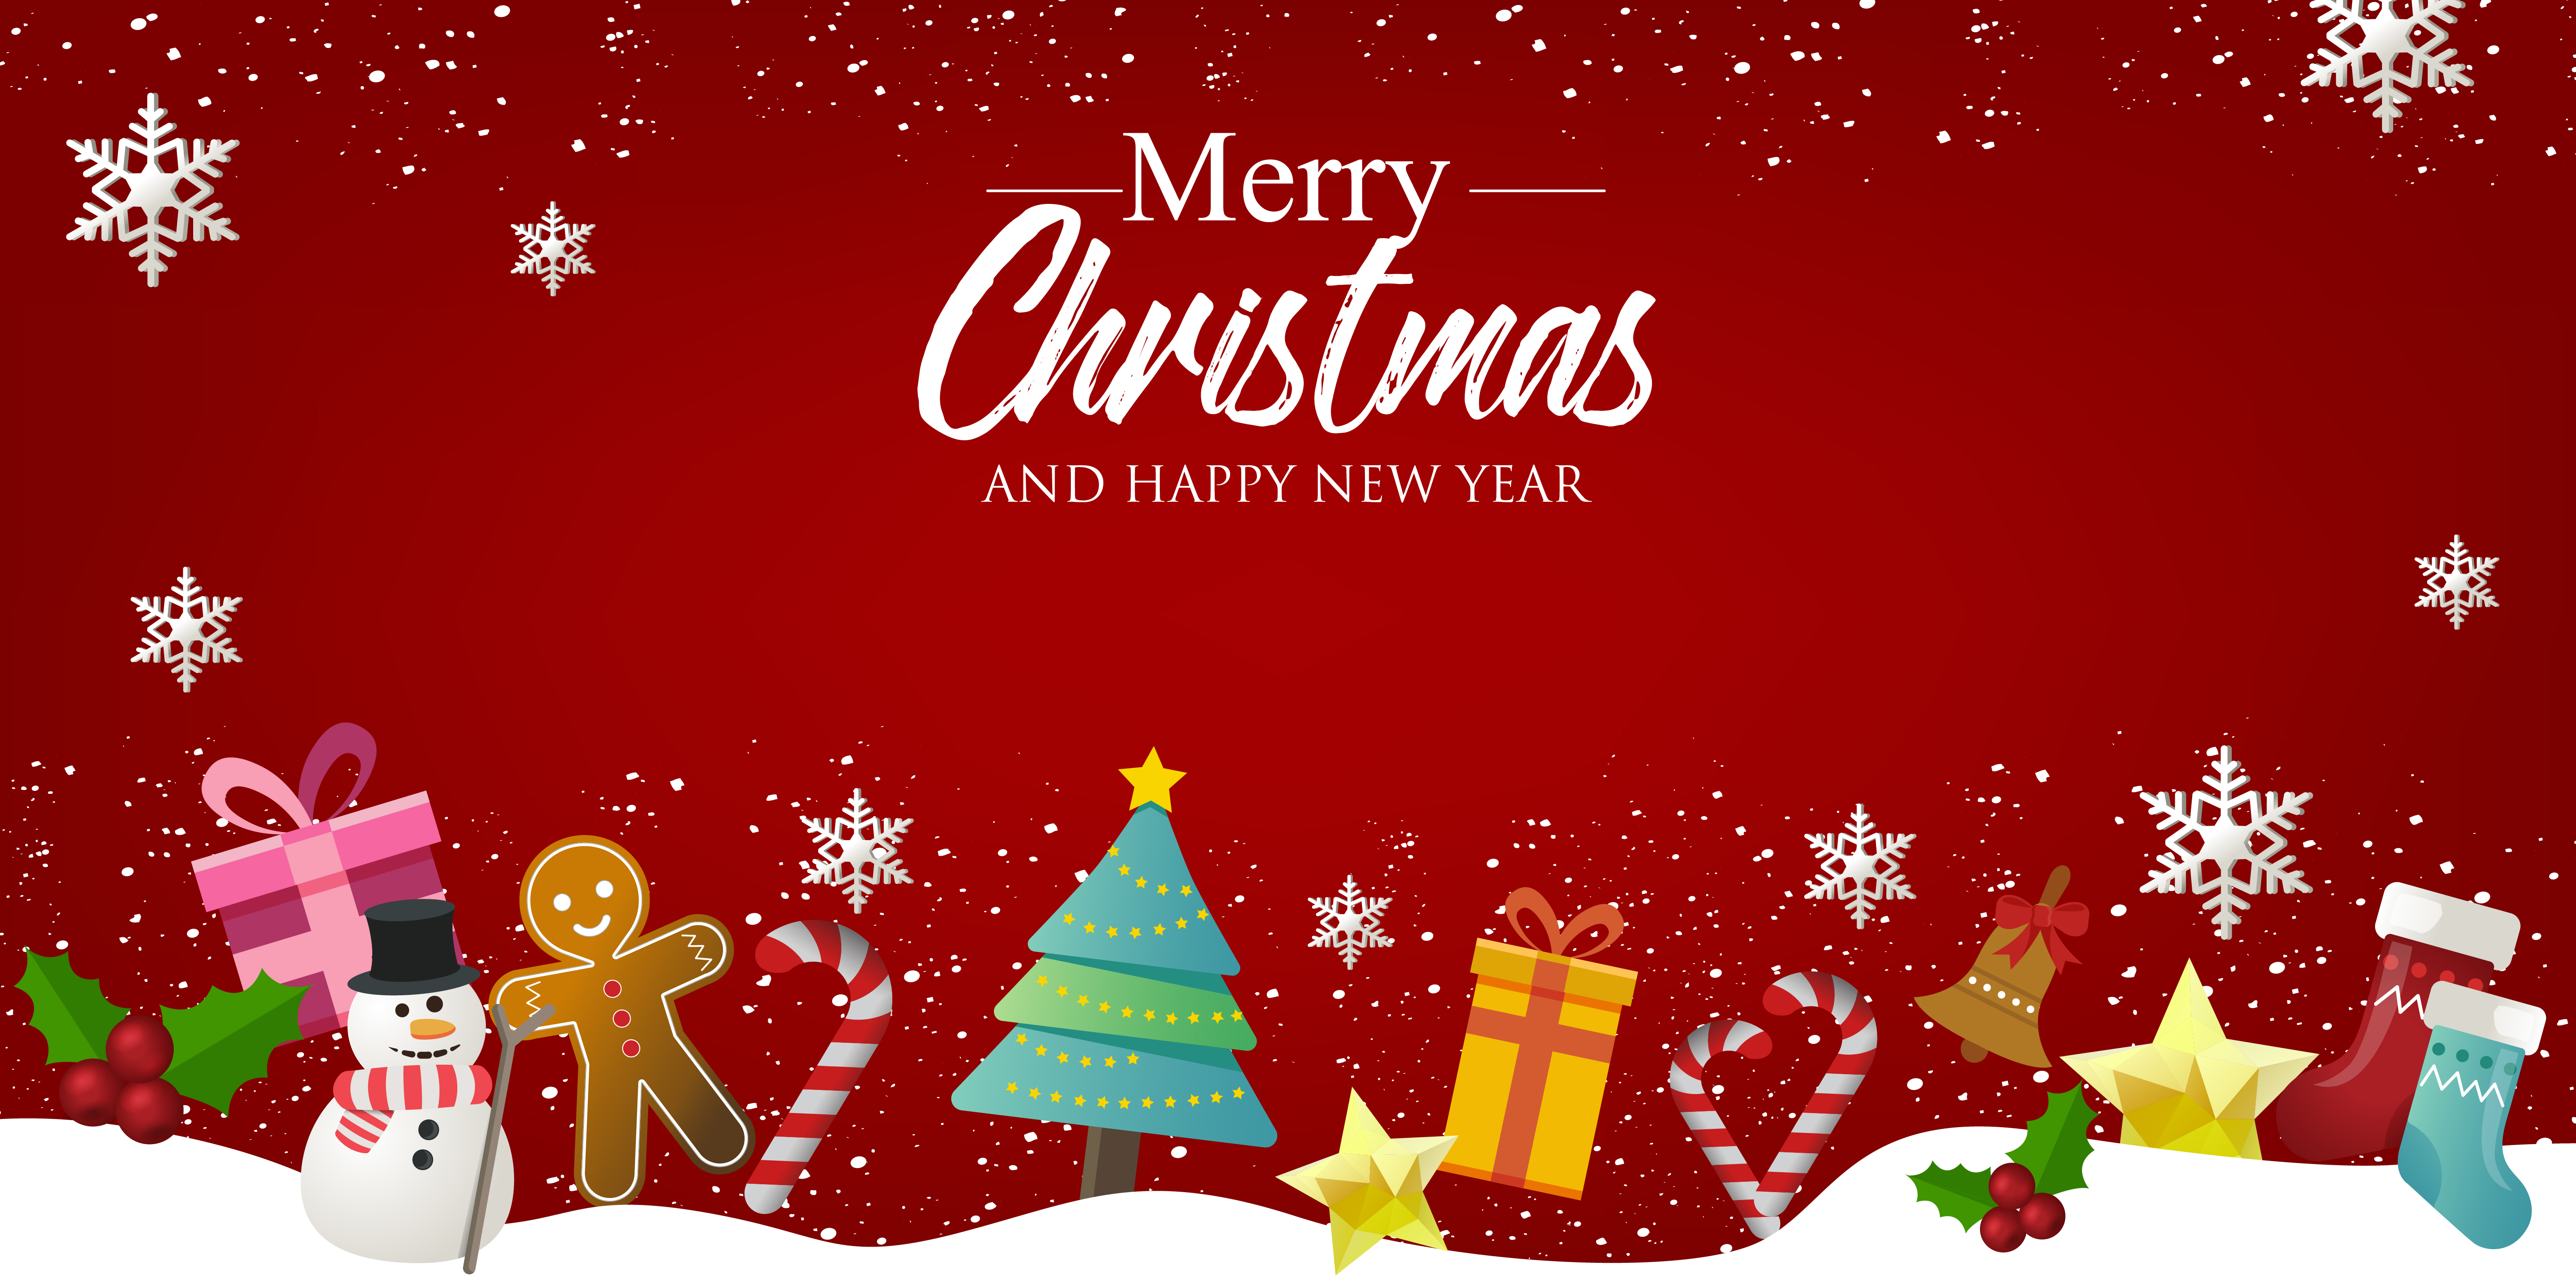 Details 100 merry christmas and happy new year background